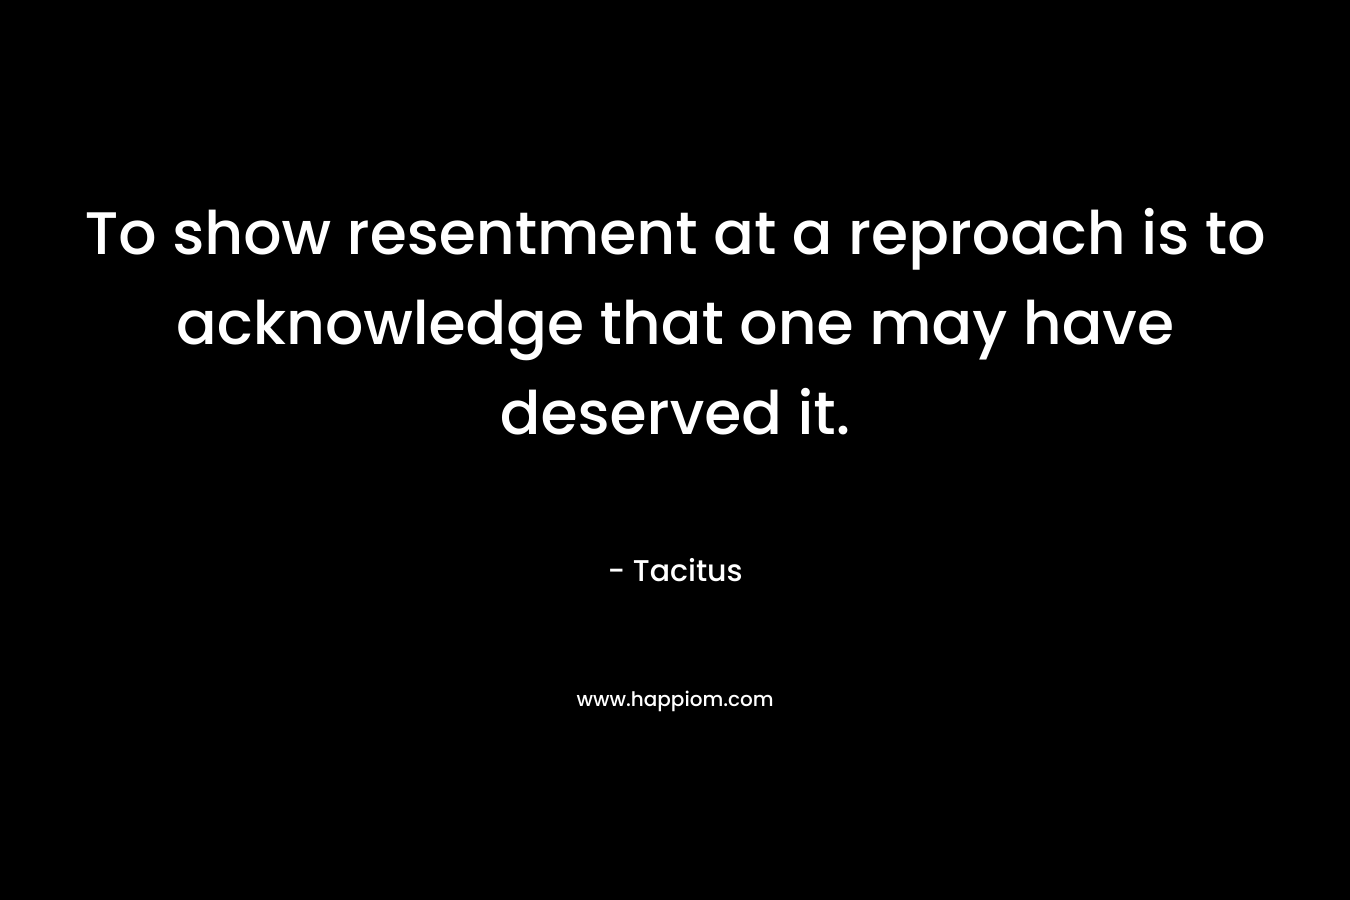 To show resentment at a reproach is to acknowledge that one may have deserved it. – Tacitus